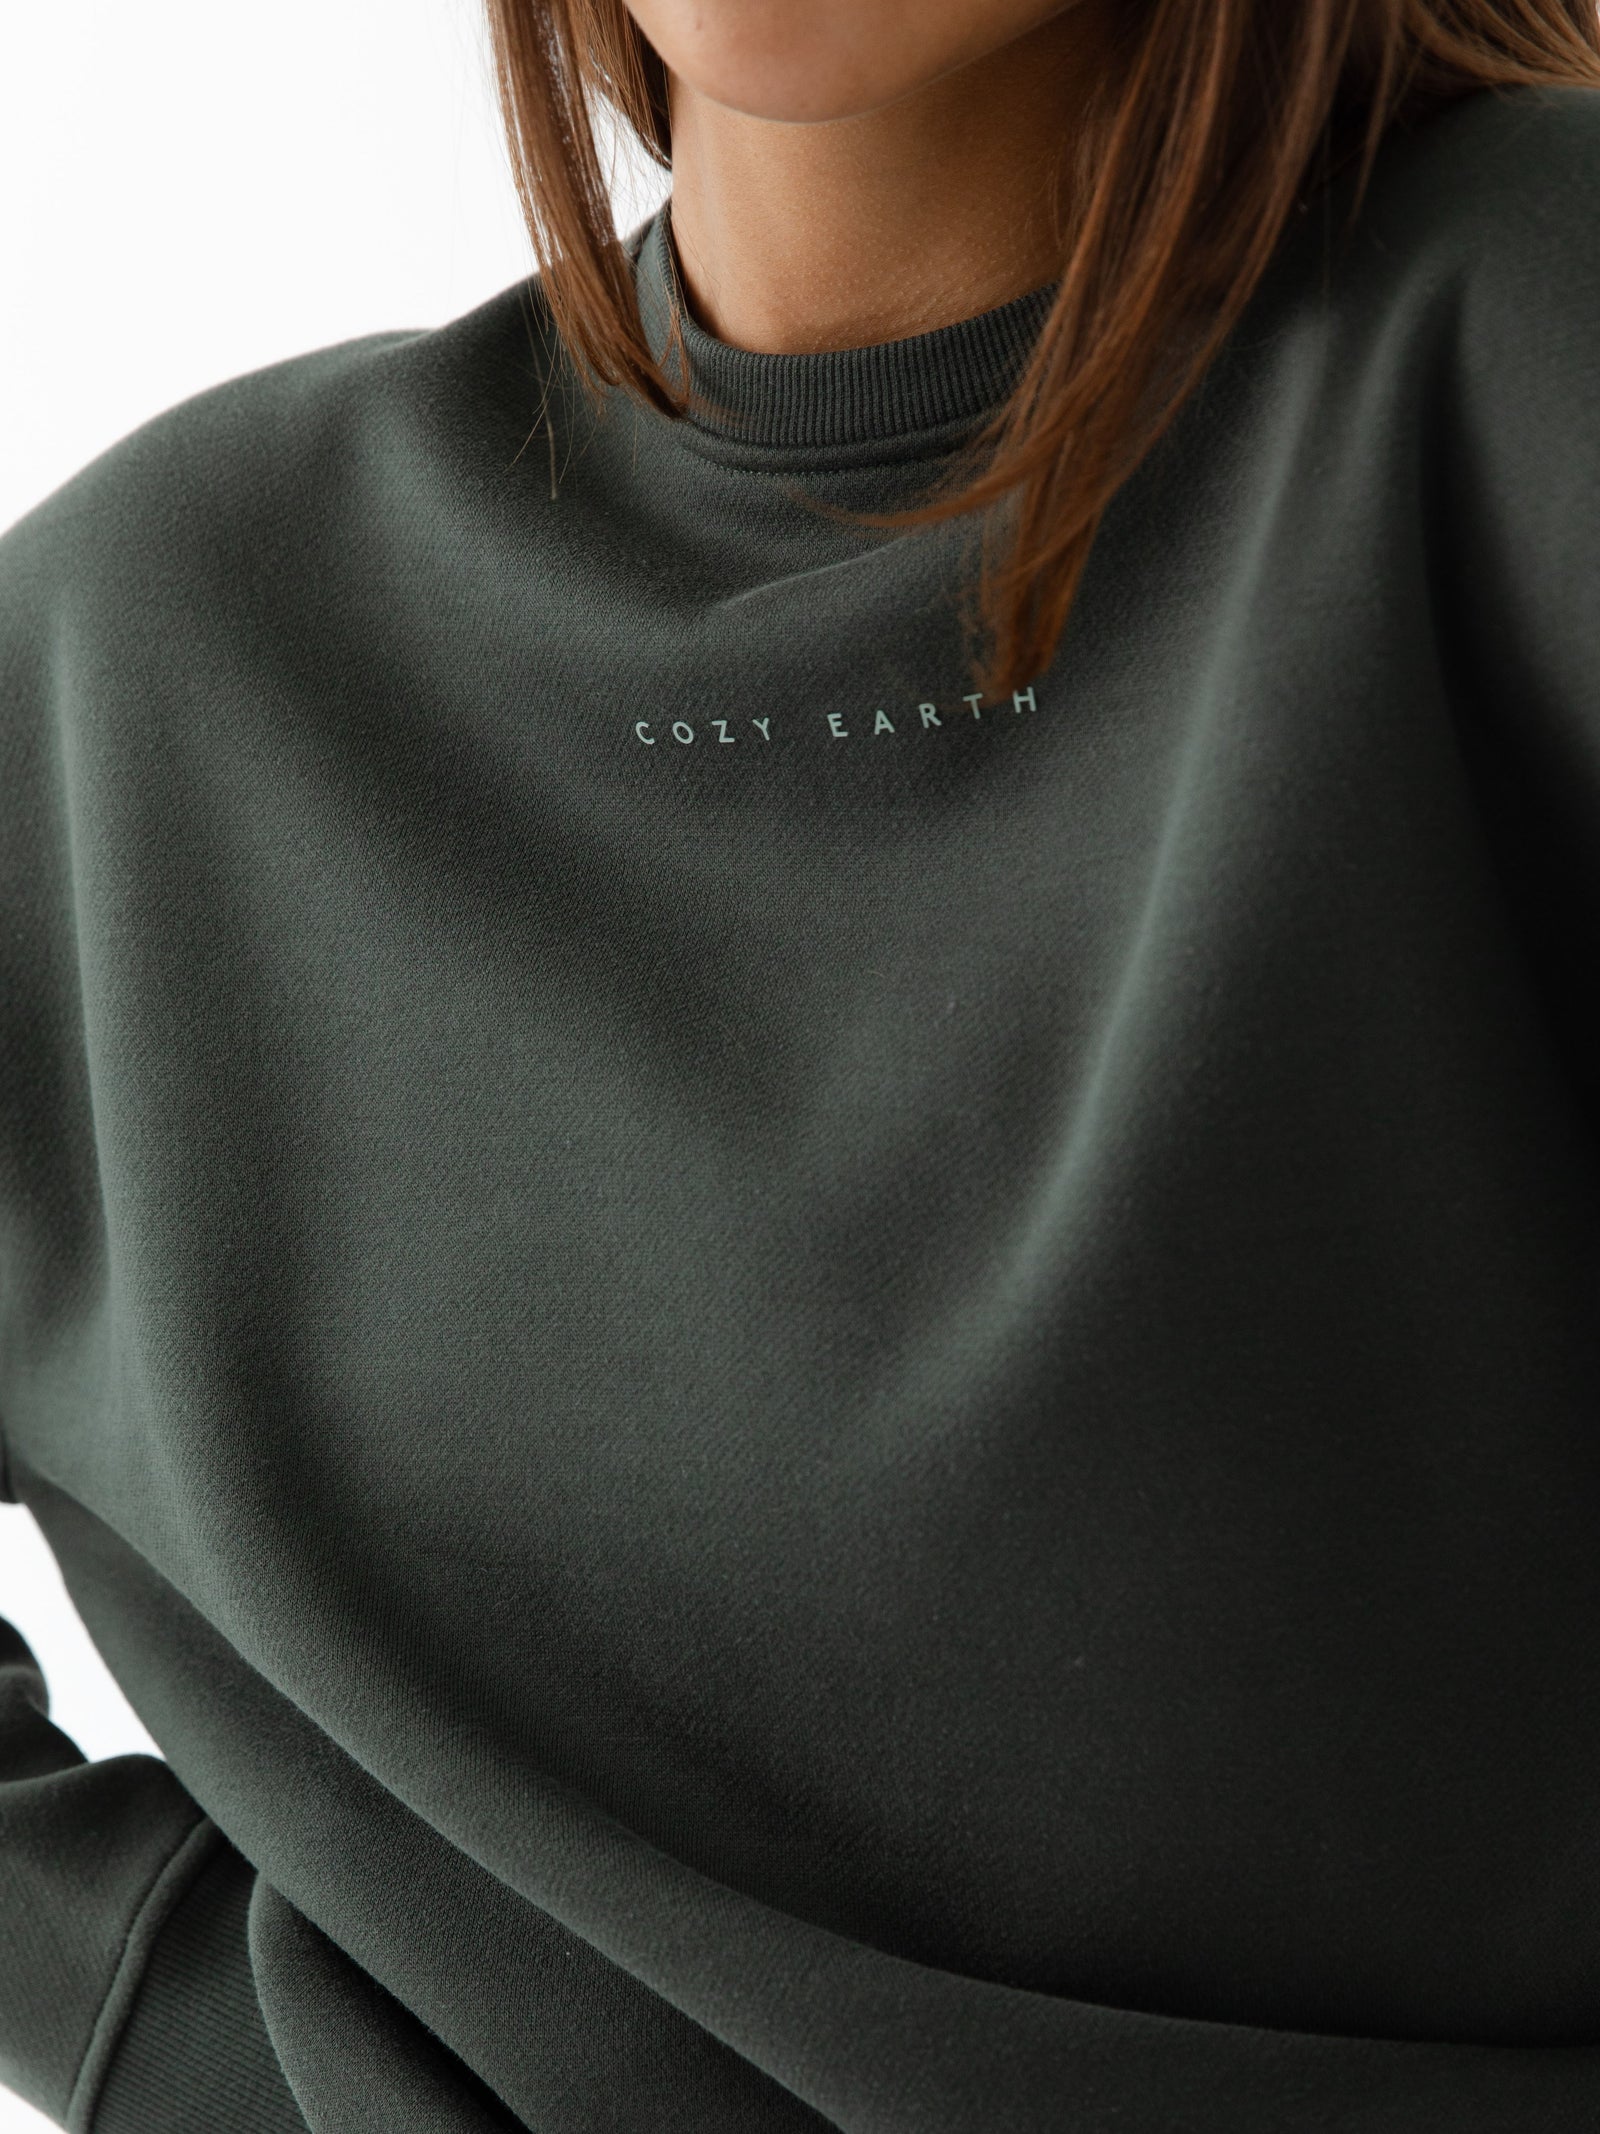 Storm CityScape Pullover Crew. The Pullover is being worn by a female model. The photo was taken with a white background. 